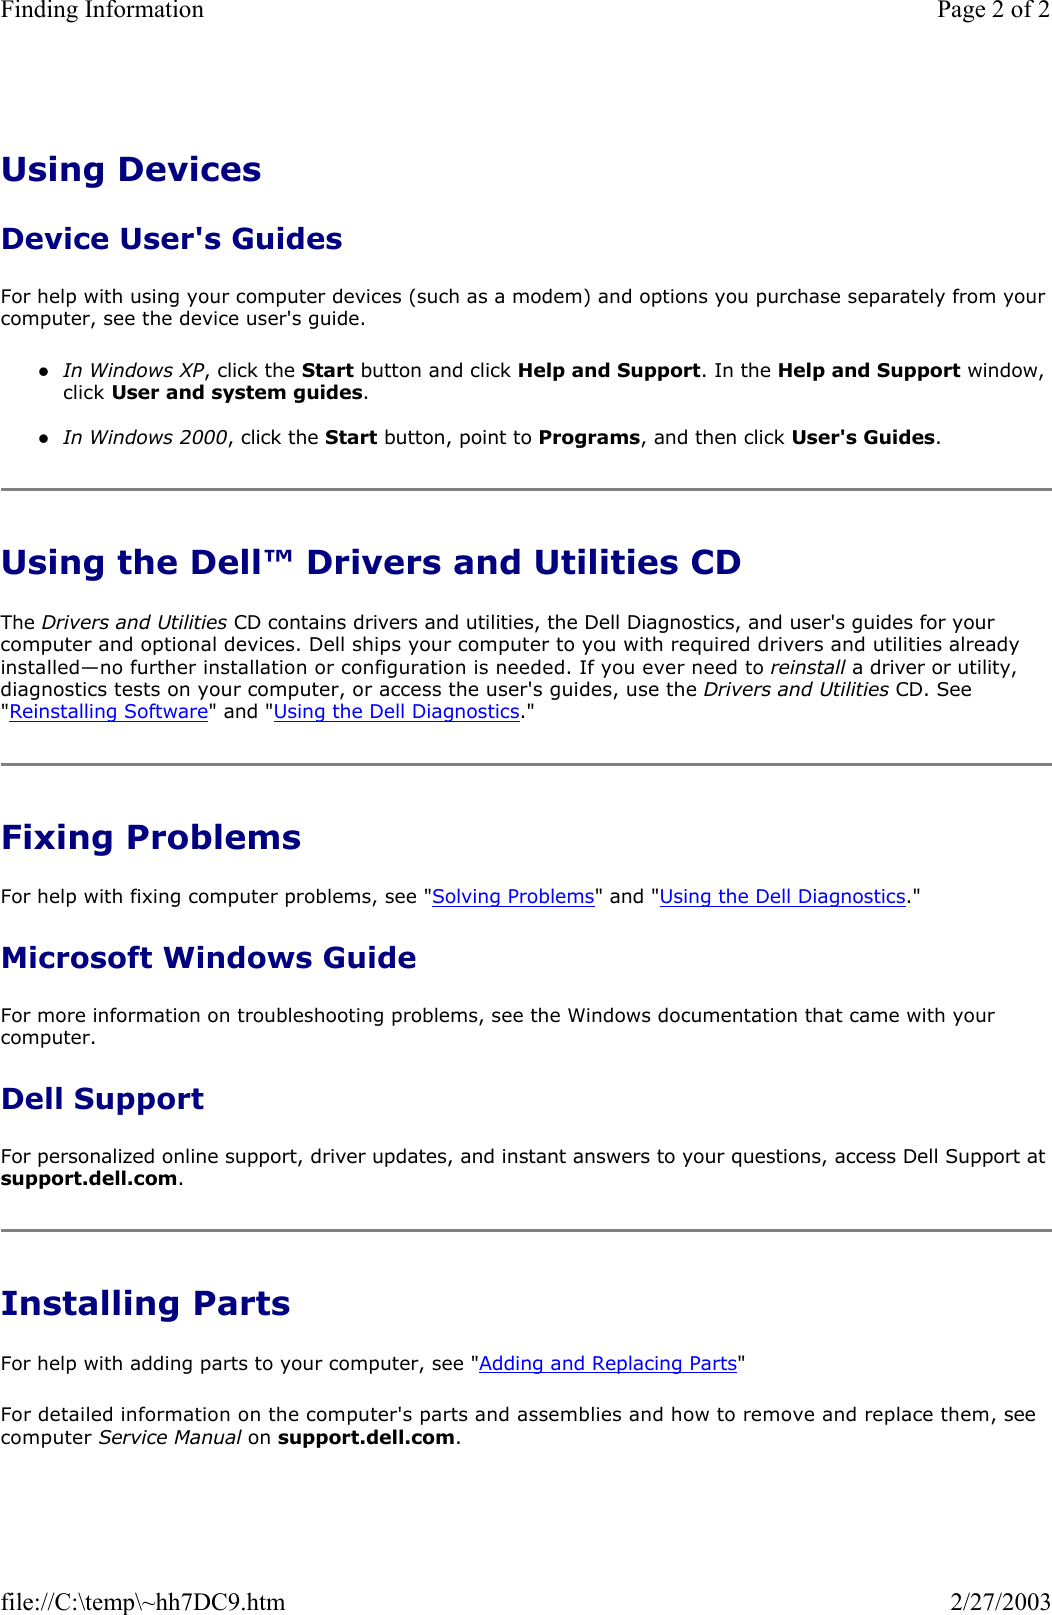 Using Devices Device User&apos;s Guides For help with using your computer devices (such as a modem) and options you purchase separately from your computer, see the device user&apos;s guide. zIn Windows XP, click the Start button and click Help and Support. In the Help and Support window, click User and system guides.  zIn Windows 2000, click the Start button, point to Programs, and then click User&apos;s Guides.  Using the Dell™ Drivers and Utilities CD The Drivers and Utilities CD contains drivers and utilities, the Dell Diagnostics, and user&apos;s guides for your computer and optional devices. Dell ships your computer to you with required drivers and utilities already installed—no further installation or configuration is needed. If you ever need to reinstall a driver or utility, diagnostics tests on your computer, or access the user&apos;s guides, use the Drivers and Utilities CD. See &quot;Reinstalling Software&quot; and &quot;Using the Dell Diagnostics.&quot; Fixing Problems For help with fixing computer problems, see &quot;Solving Problems&quot; and &quot;Using the Dell Diagnostics.&quot; Microsoft Windows Guide For more information on troubleshooting problems, see the Windows documentation that came with your computer. Dell Support For personalized online support, driver updates, and instant answers to your questions, access Dell Support at support.dell.com. Installing Parts For help with adding parts to your computer, see &quot;Adding and Replacing Parts&quot;  For detailed information on the computer&apos;s parts and assemblies and how to remove and replace them, see computer Service Manual on support.dell.com. Page 2 of 2Finding Information2/27/2003file://C:\temp\~hh7DC9.htm